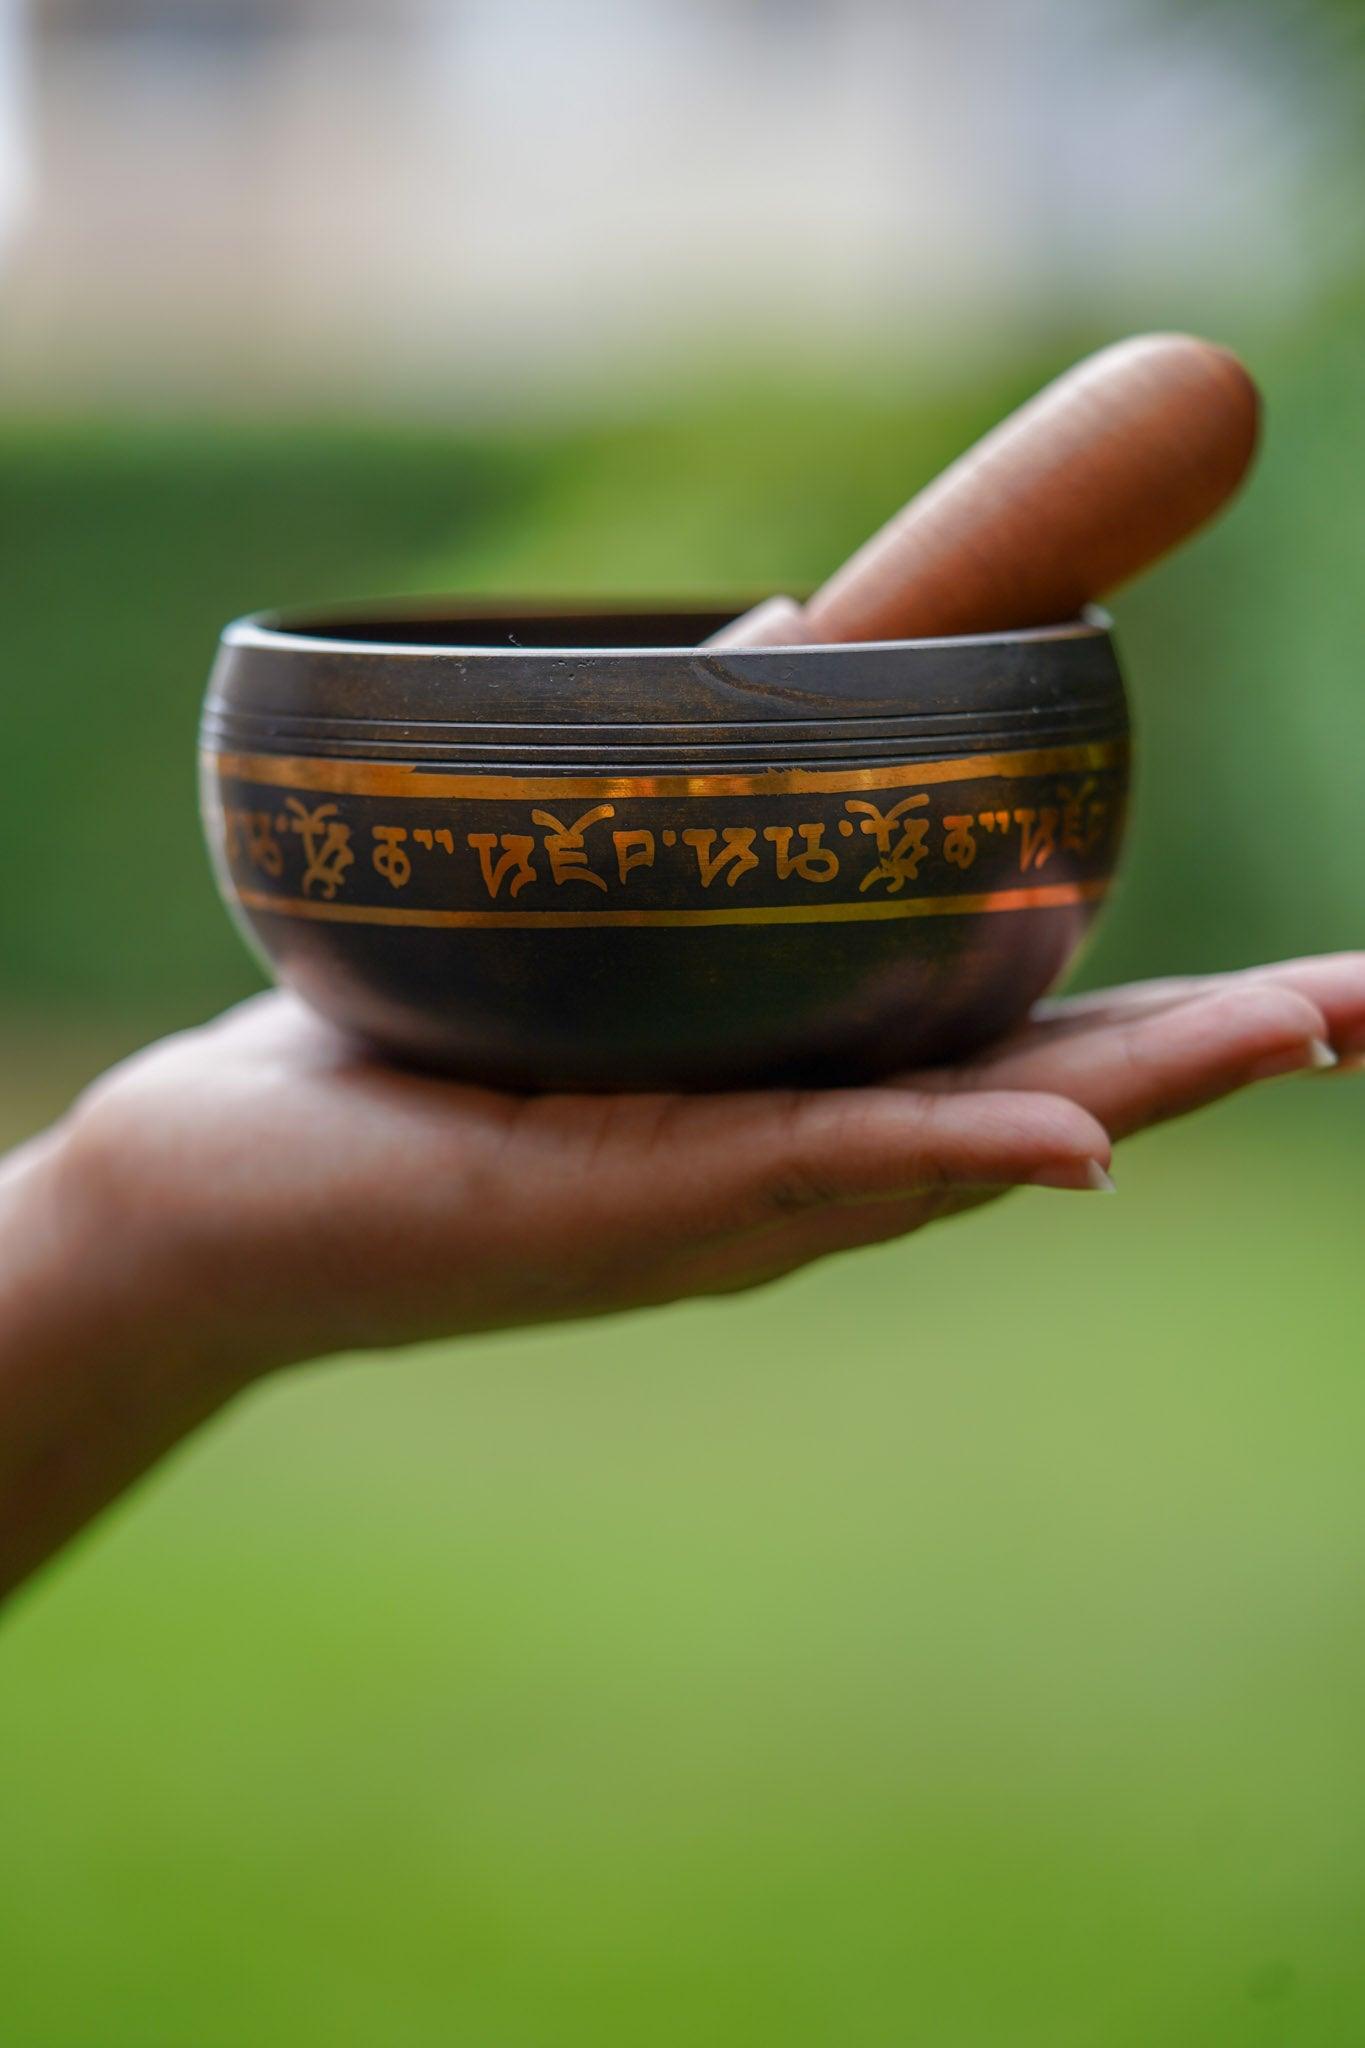 A complete package includes: 1. A 4.5 inch Singing Bowl 2. A resting cushion 3. 1 x wooden stick  Why it is must buy? 1. Elevates of life force. 2. Balance the mind 3. Promotes energy balance in the body. 4. Enhance creativity and focus.